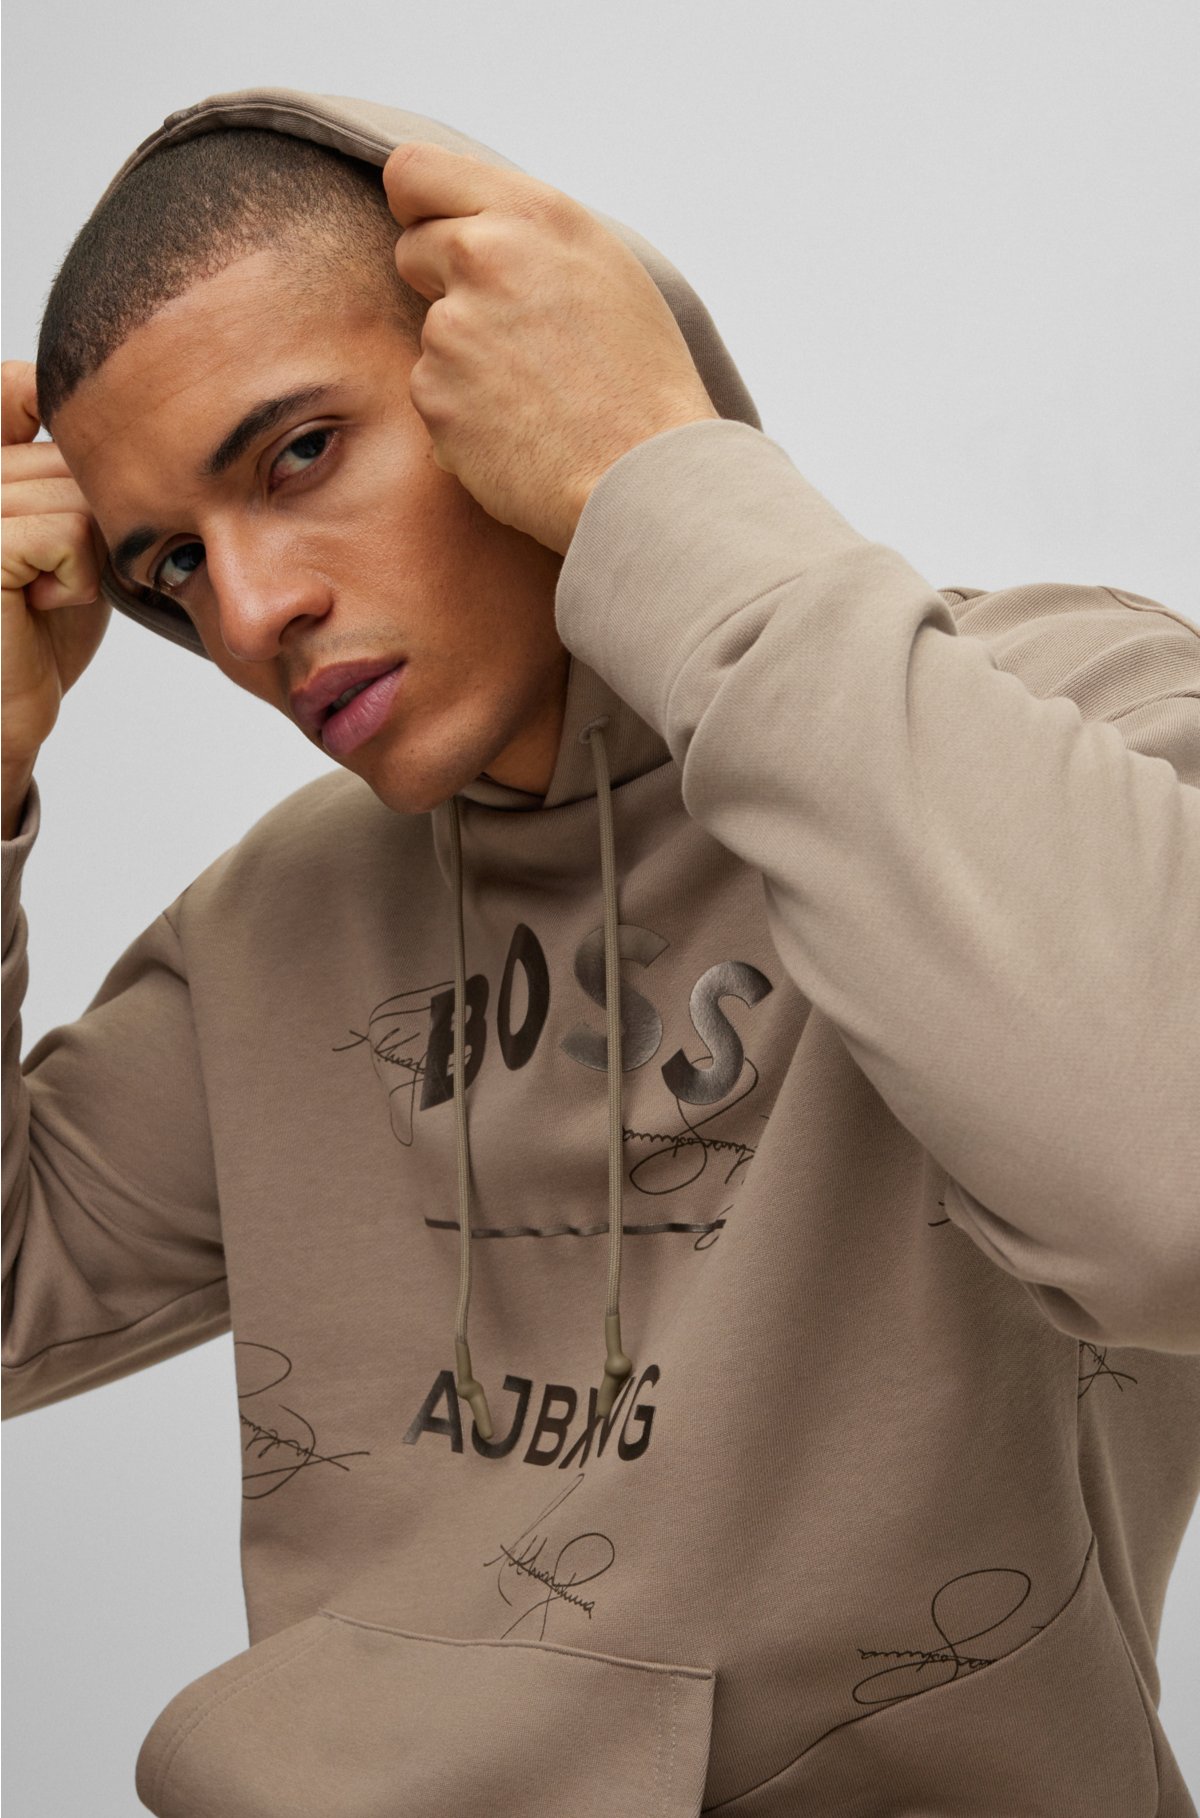 BOSS - with relaxed-fit cotton collaborative branding BOSS AJBXNG x hoodie